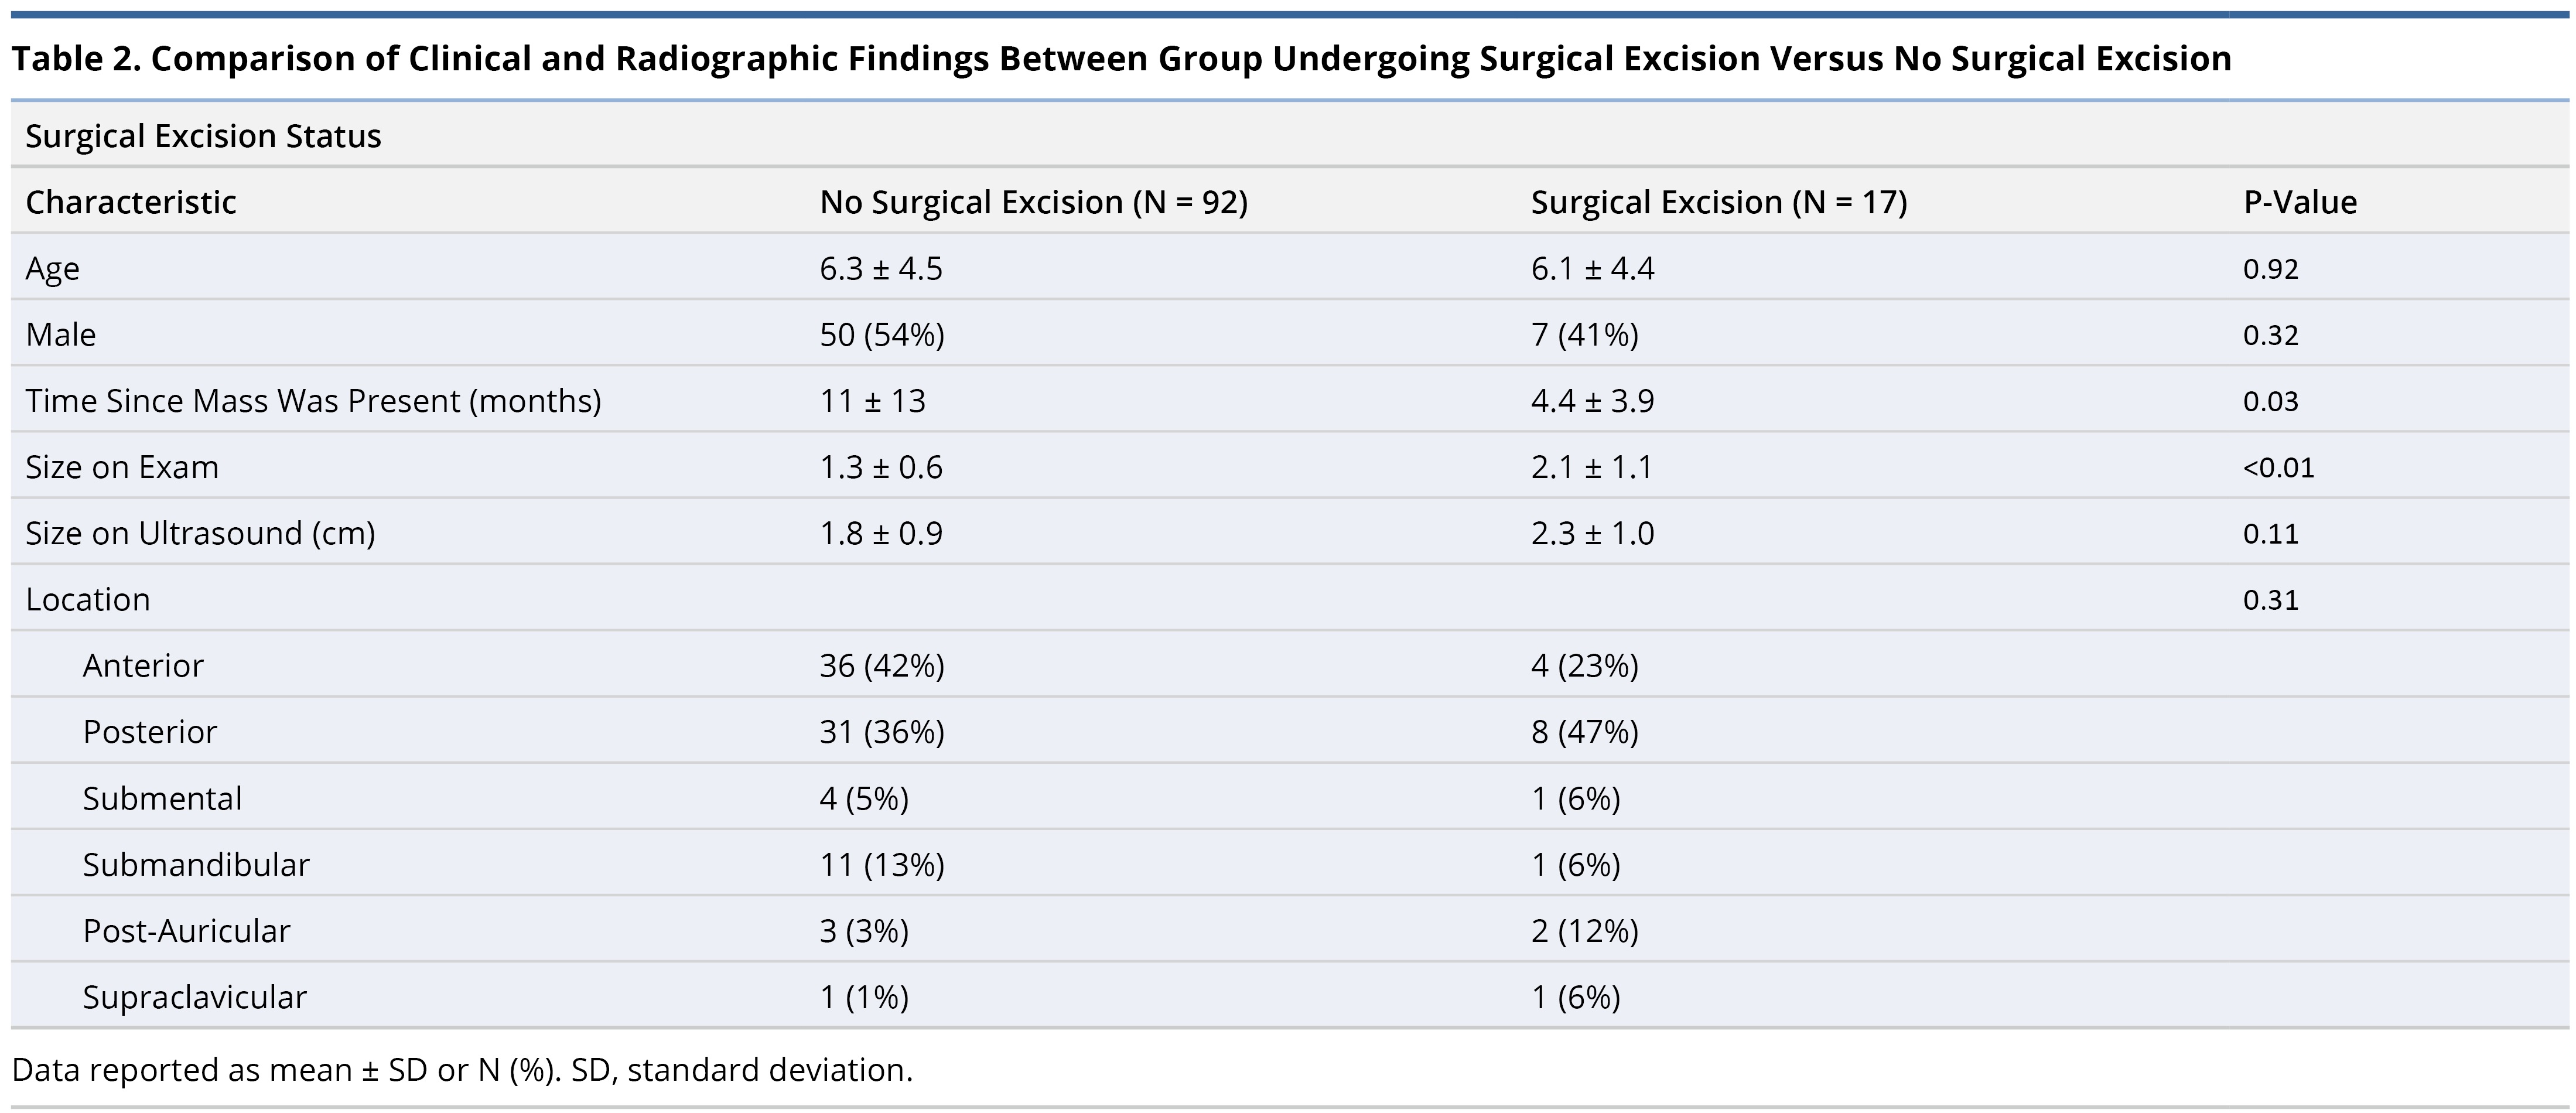 Table 2.jpgComparison of clinical and radiographic findings between group undergoing surgical excision versus no surgical excision.